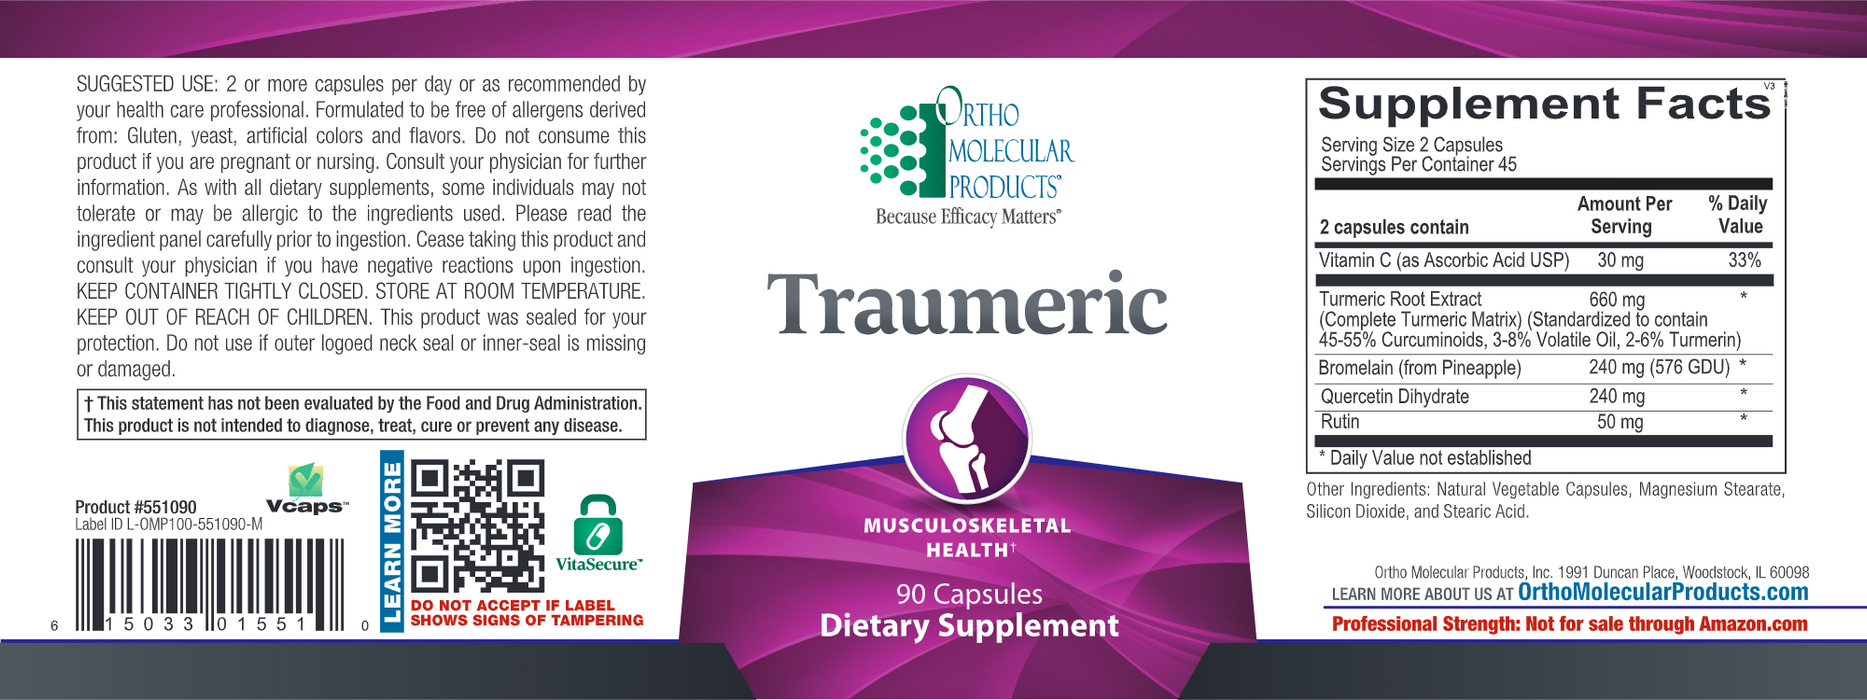 Traumeric (90 Capsules)-Vitamins & Supplements-Ortho Molecular Products-Pine Street Clinic